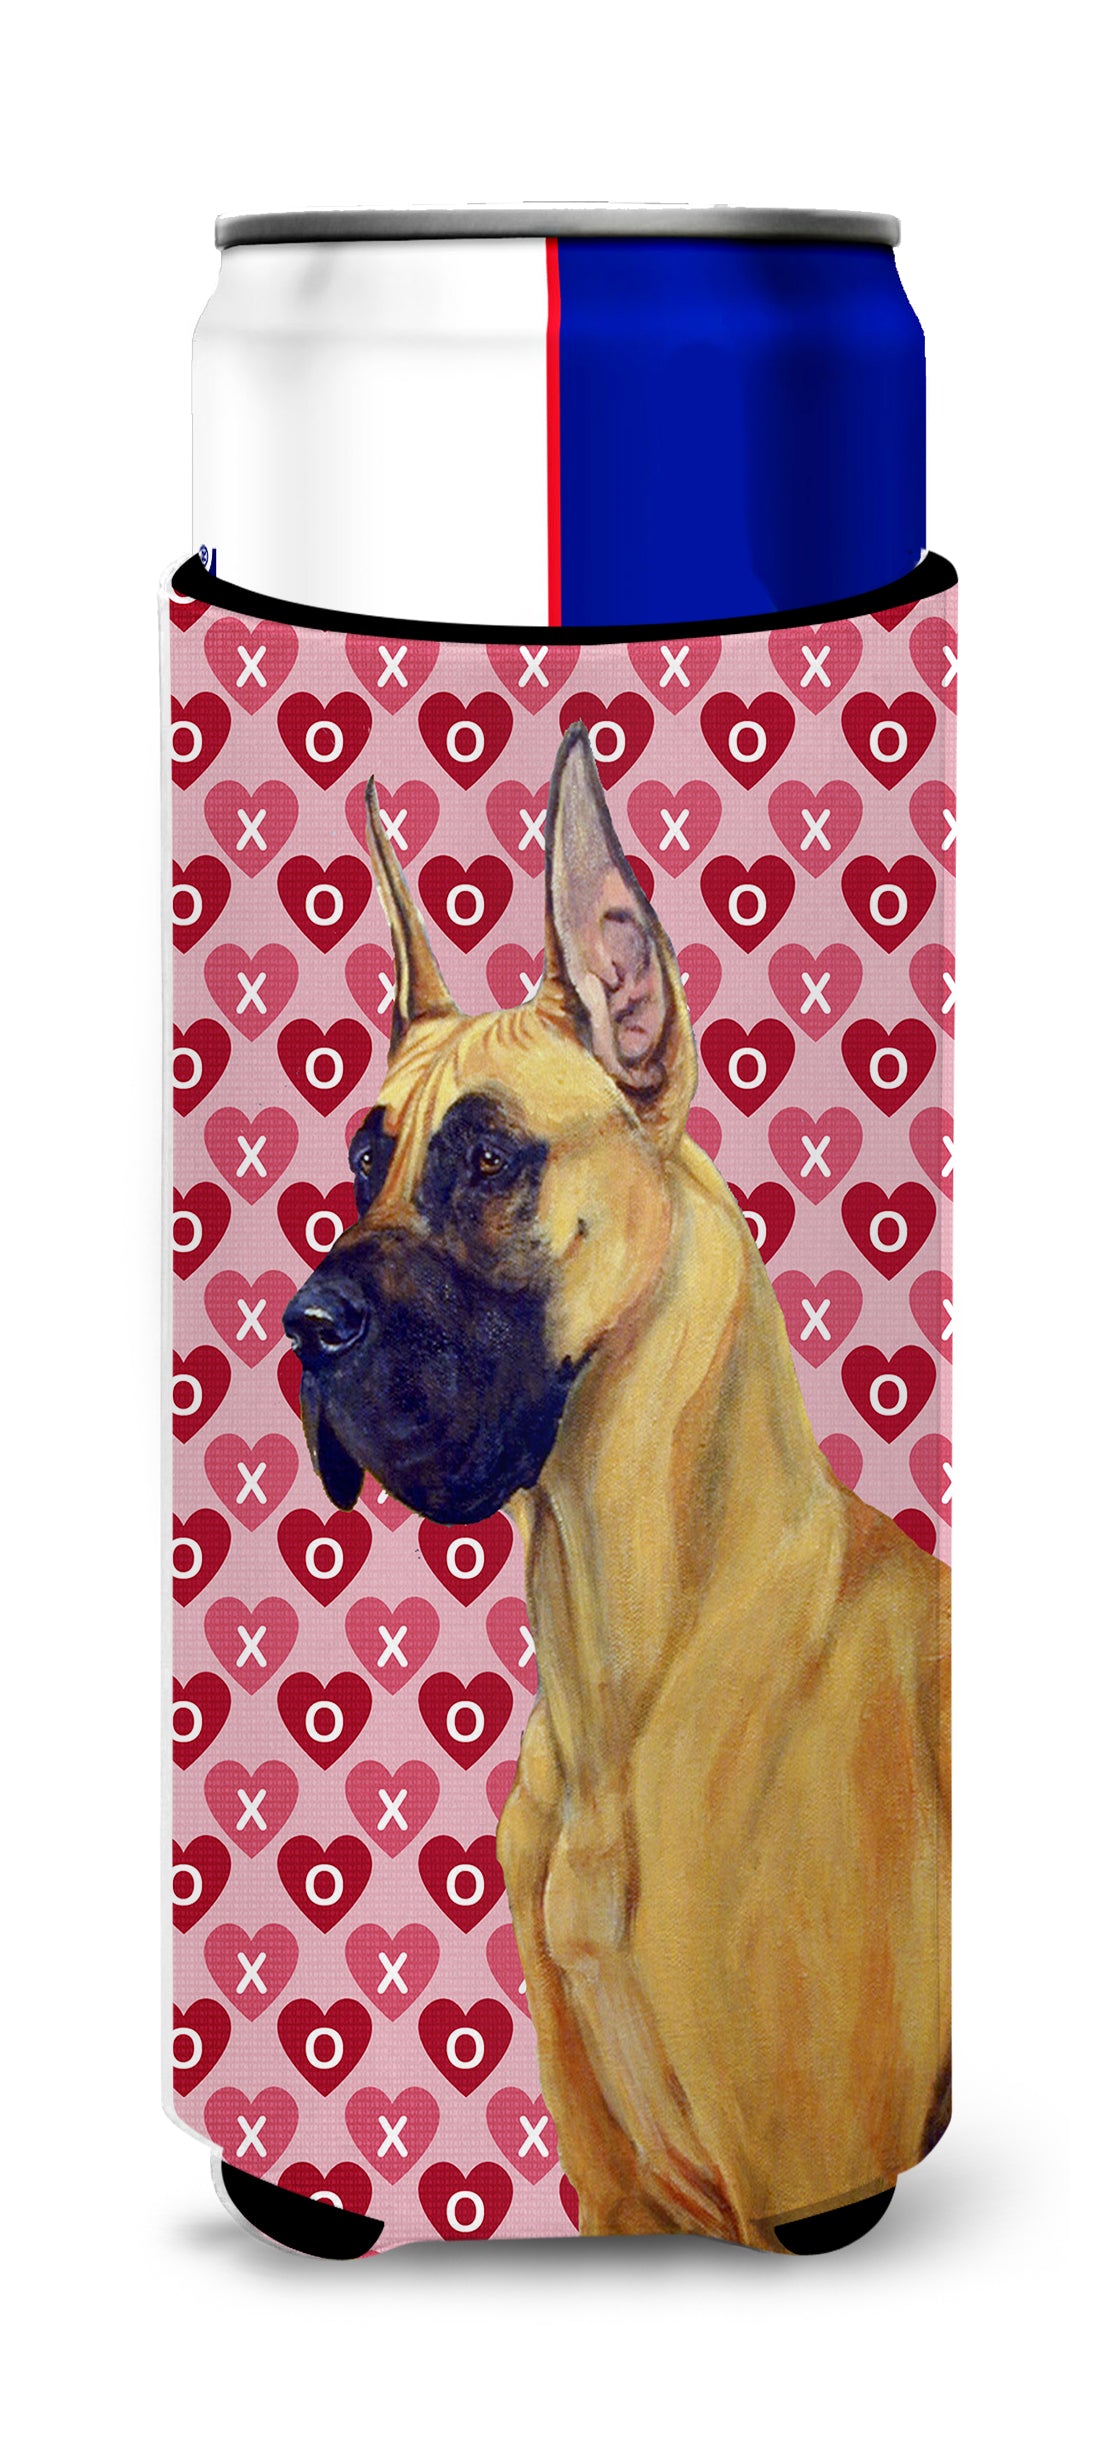 Great Dane Hearts Love and Valentine's Day Portrait Ultra Beverage Insulators for slim cans LH9130MUK.